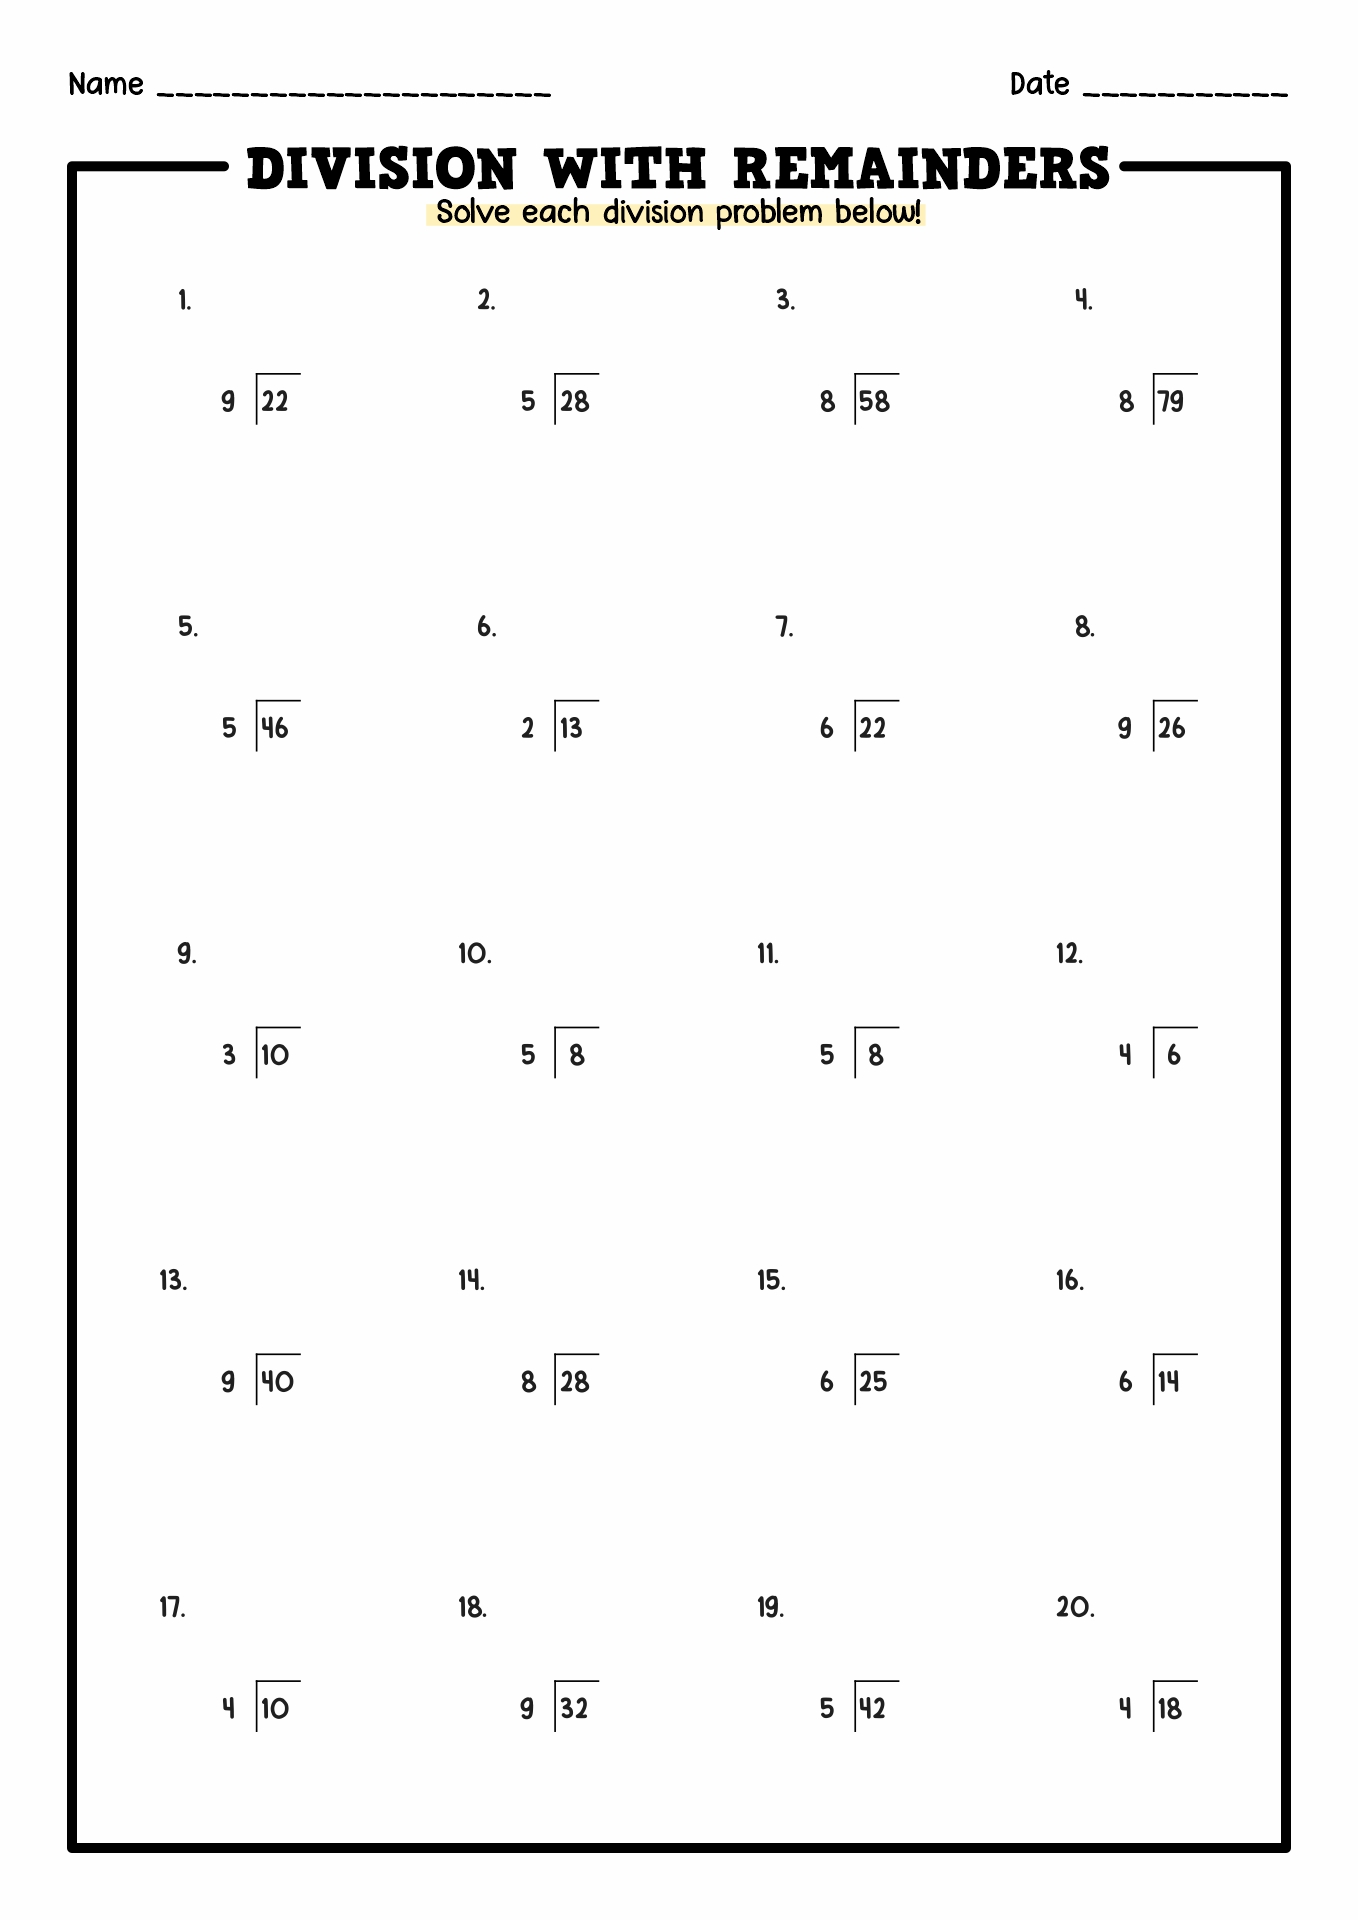 Long Division Problems with Remainders Worksheets Image